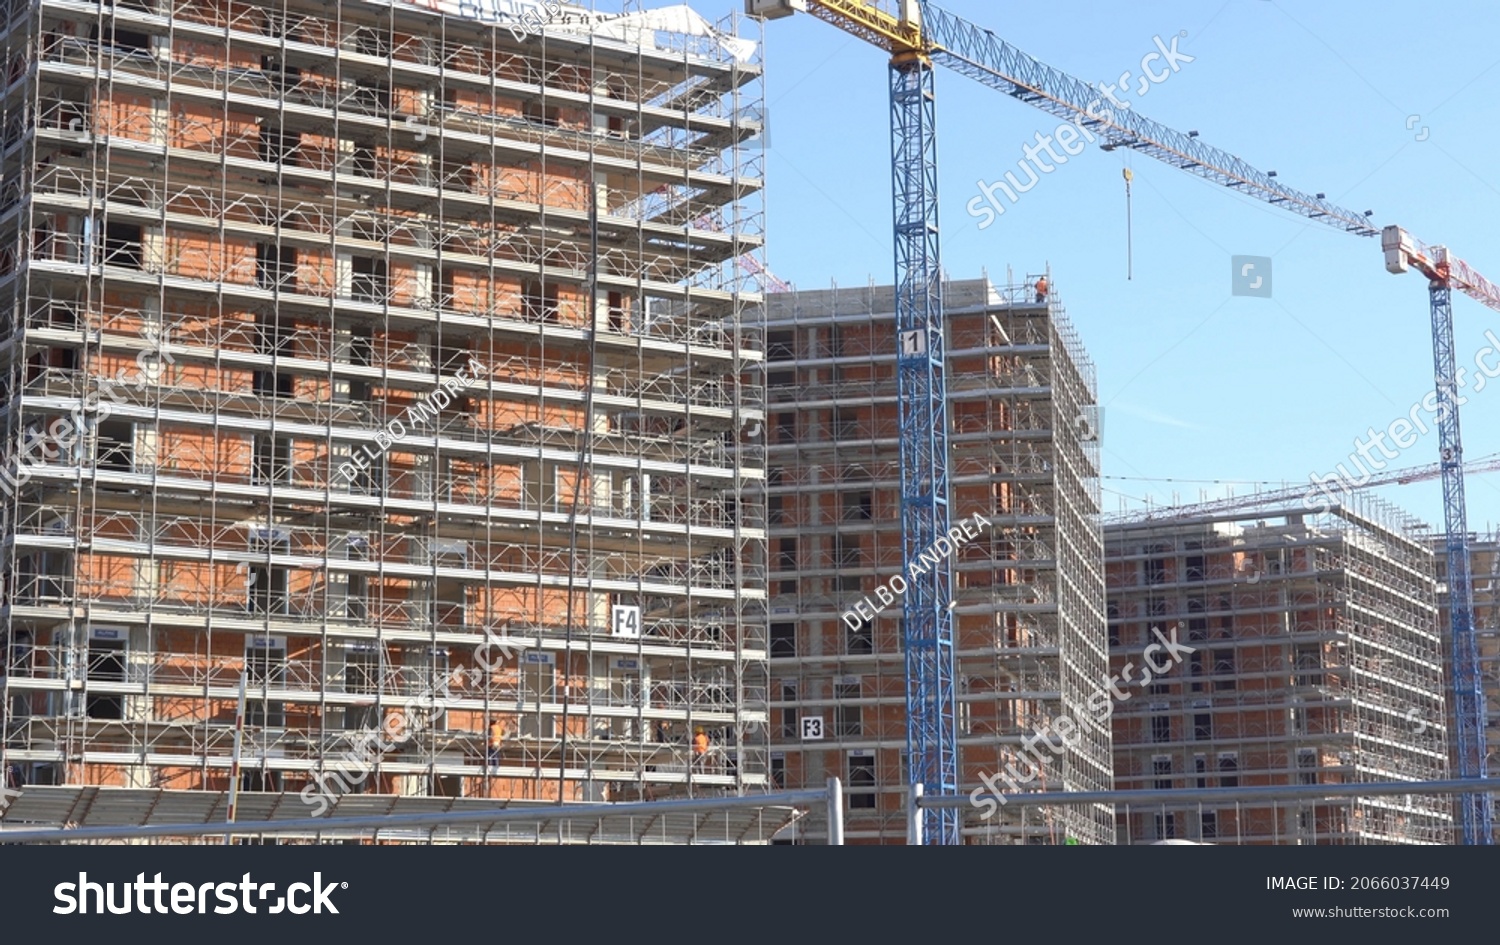 Stock Photo Europe Italy Milan October Construction Site With Scaffolding For The Construction Of 2066037449 